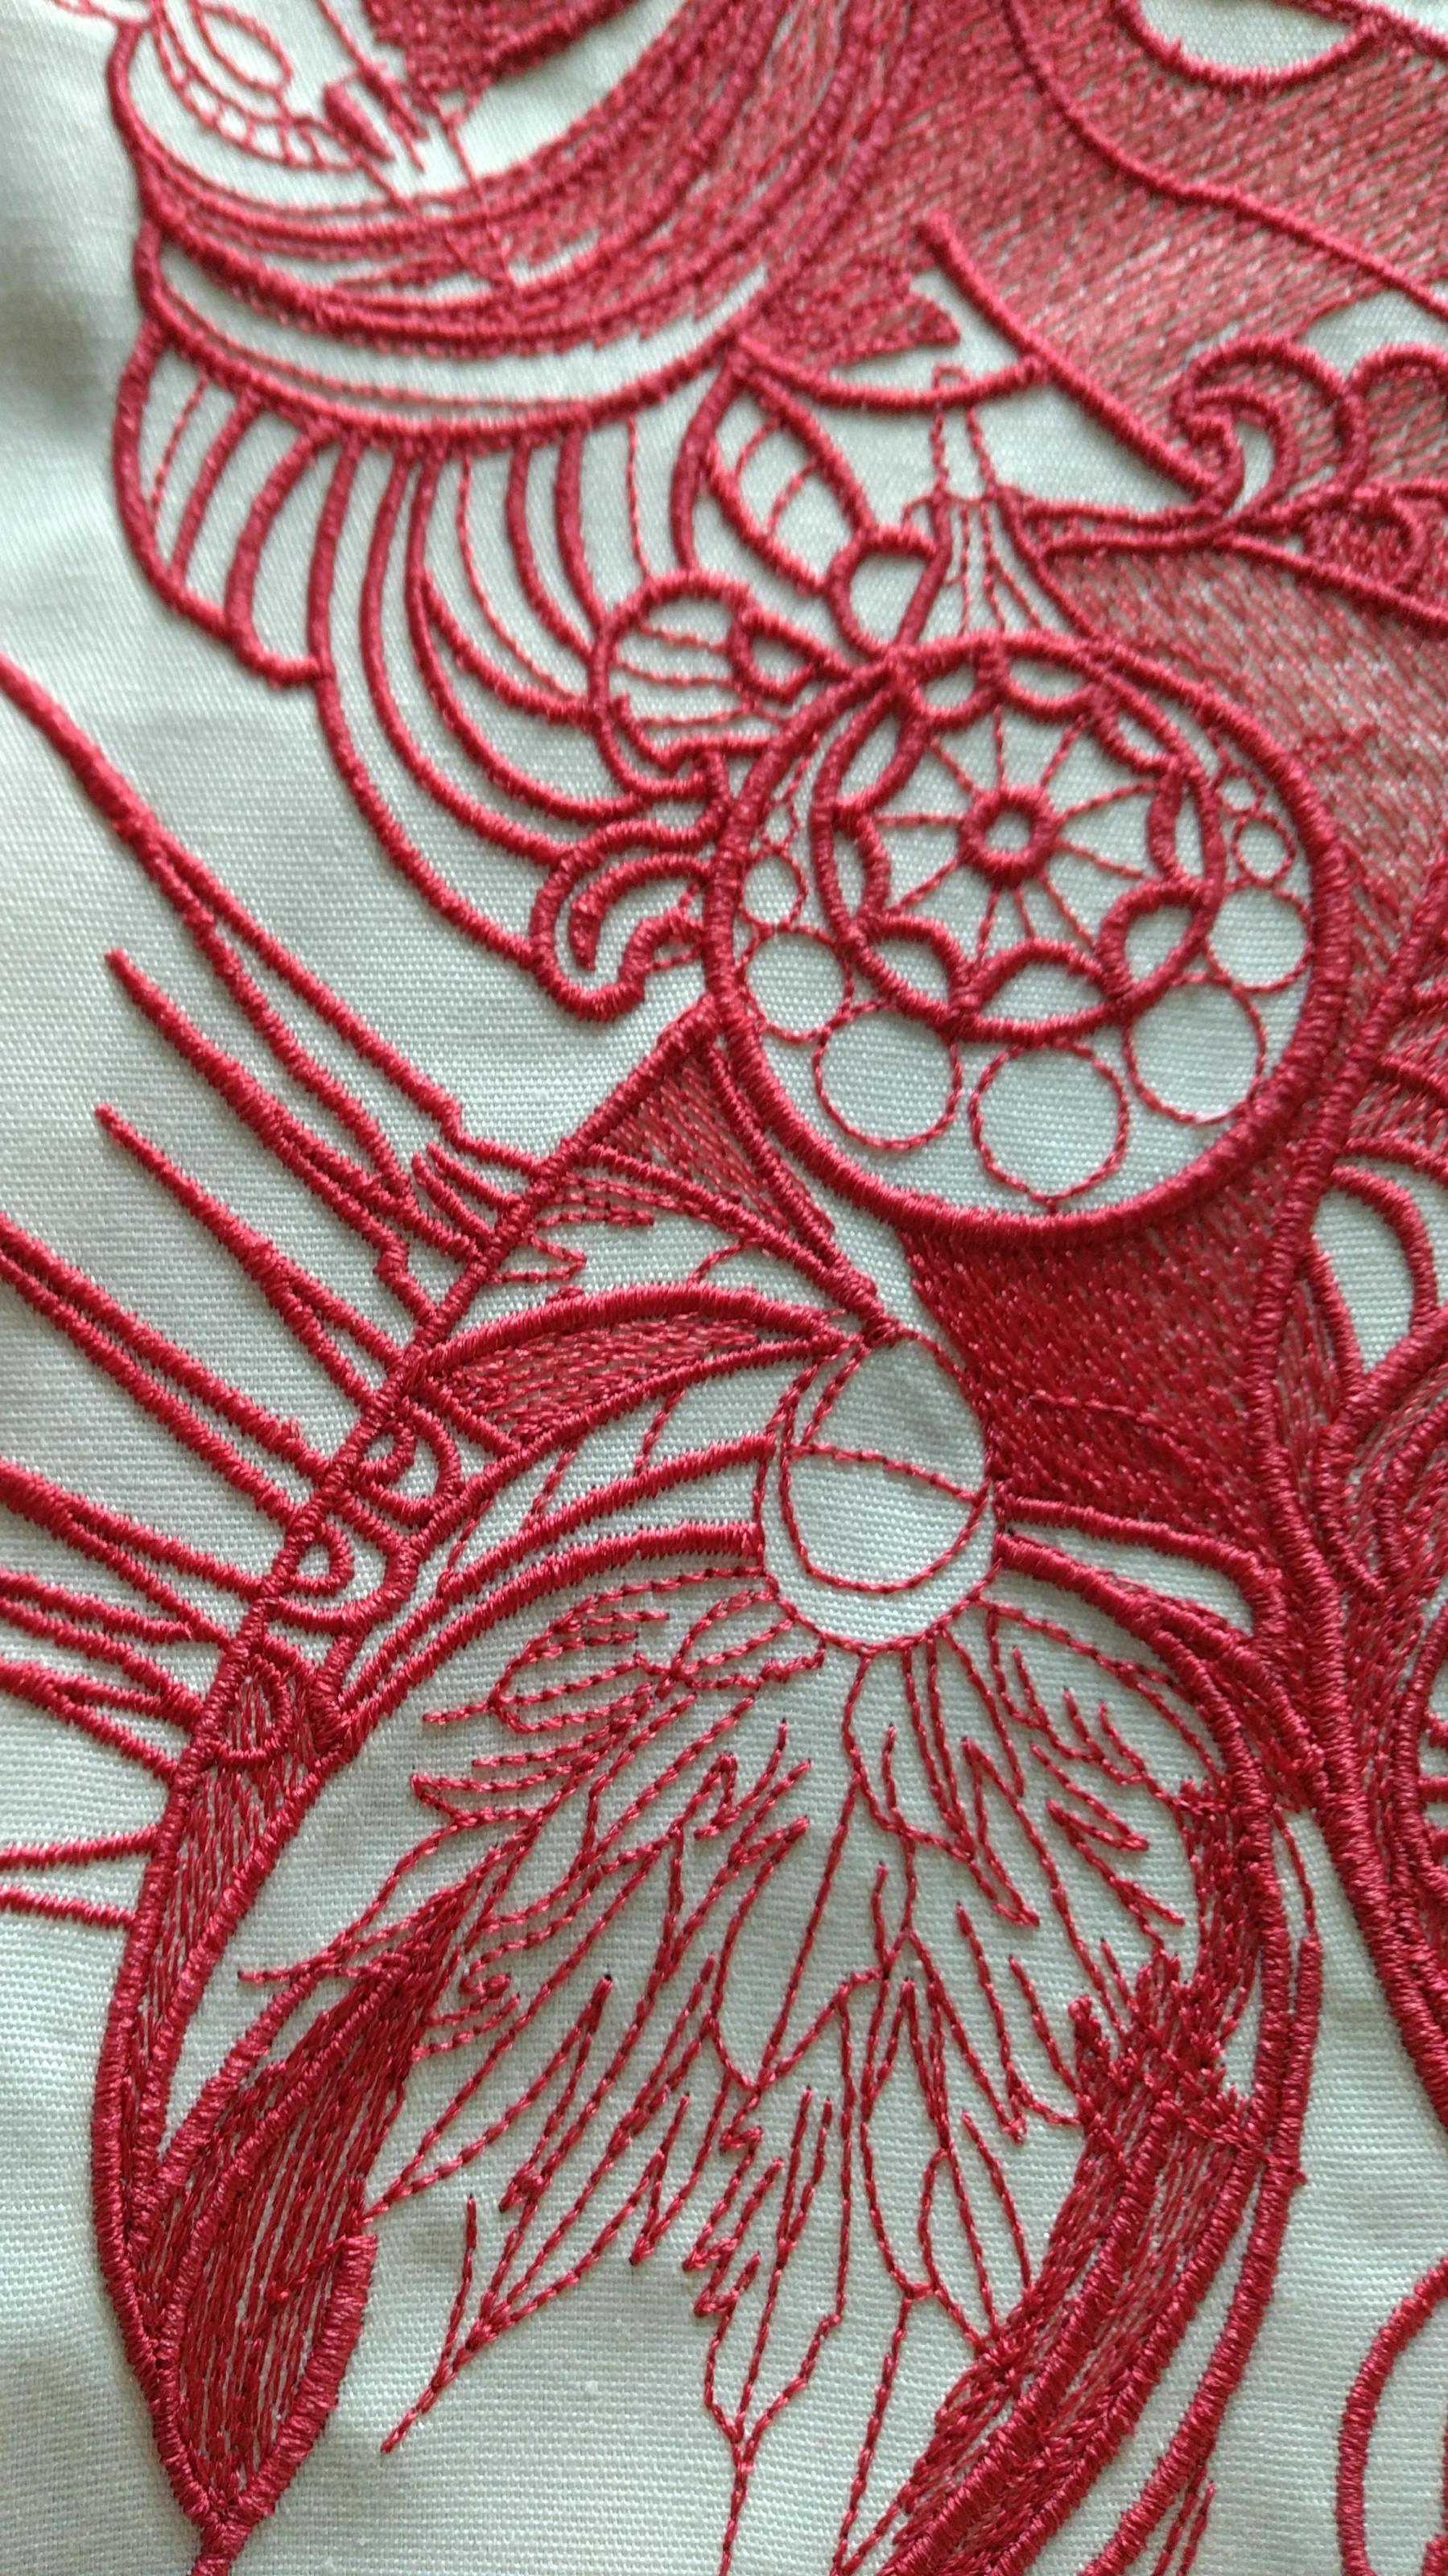 Red sexy lady machine embroidery design